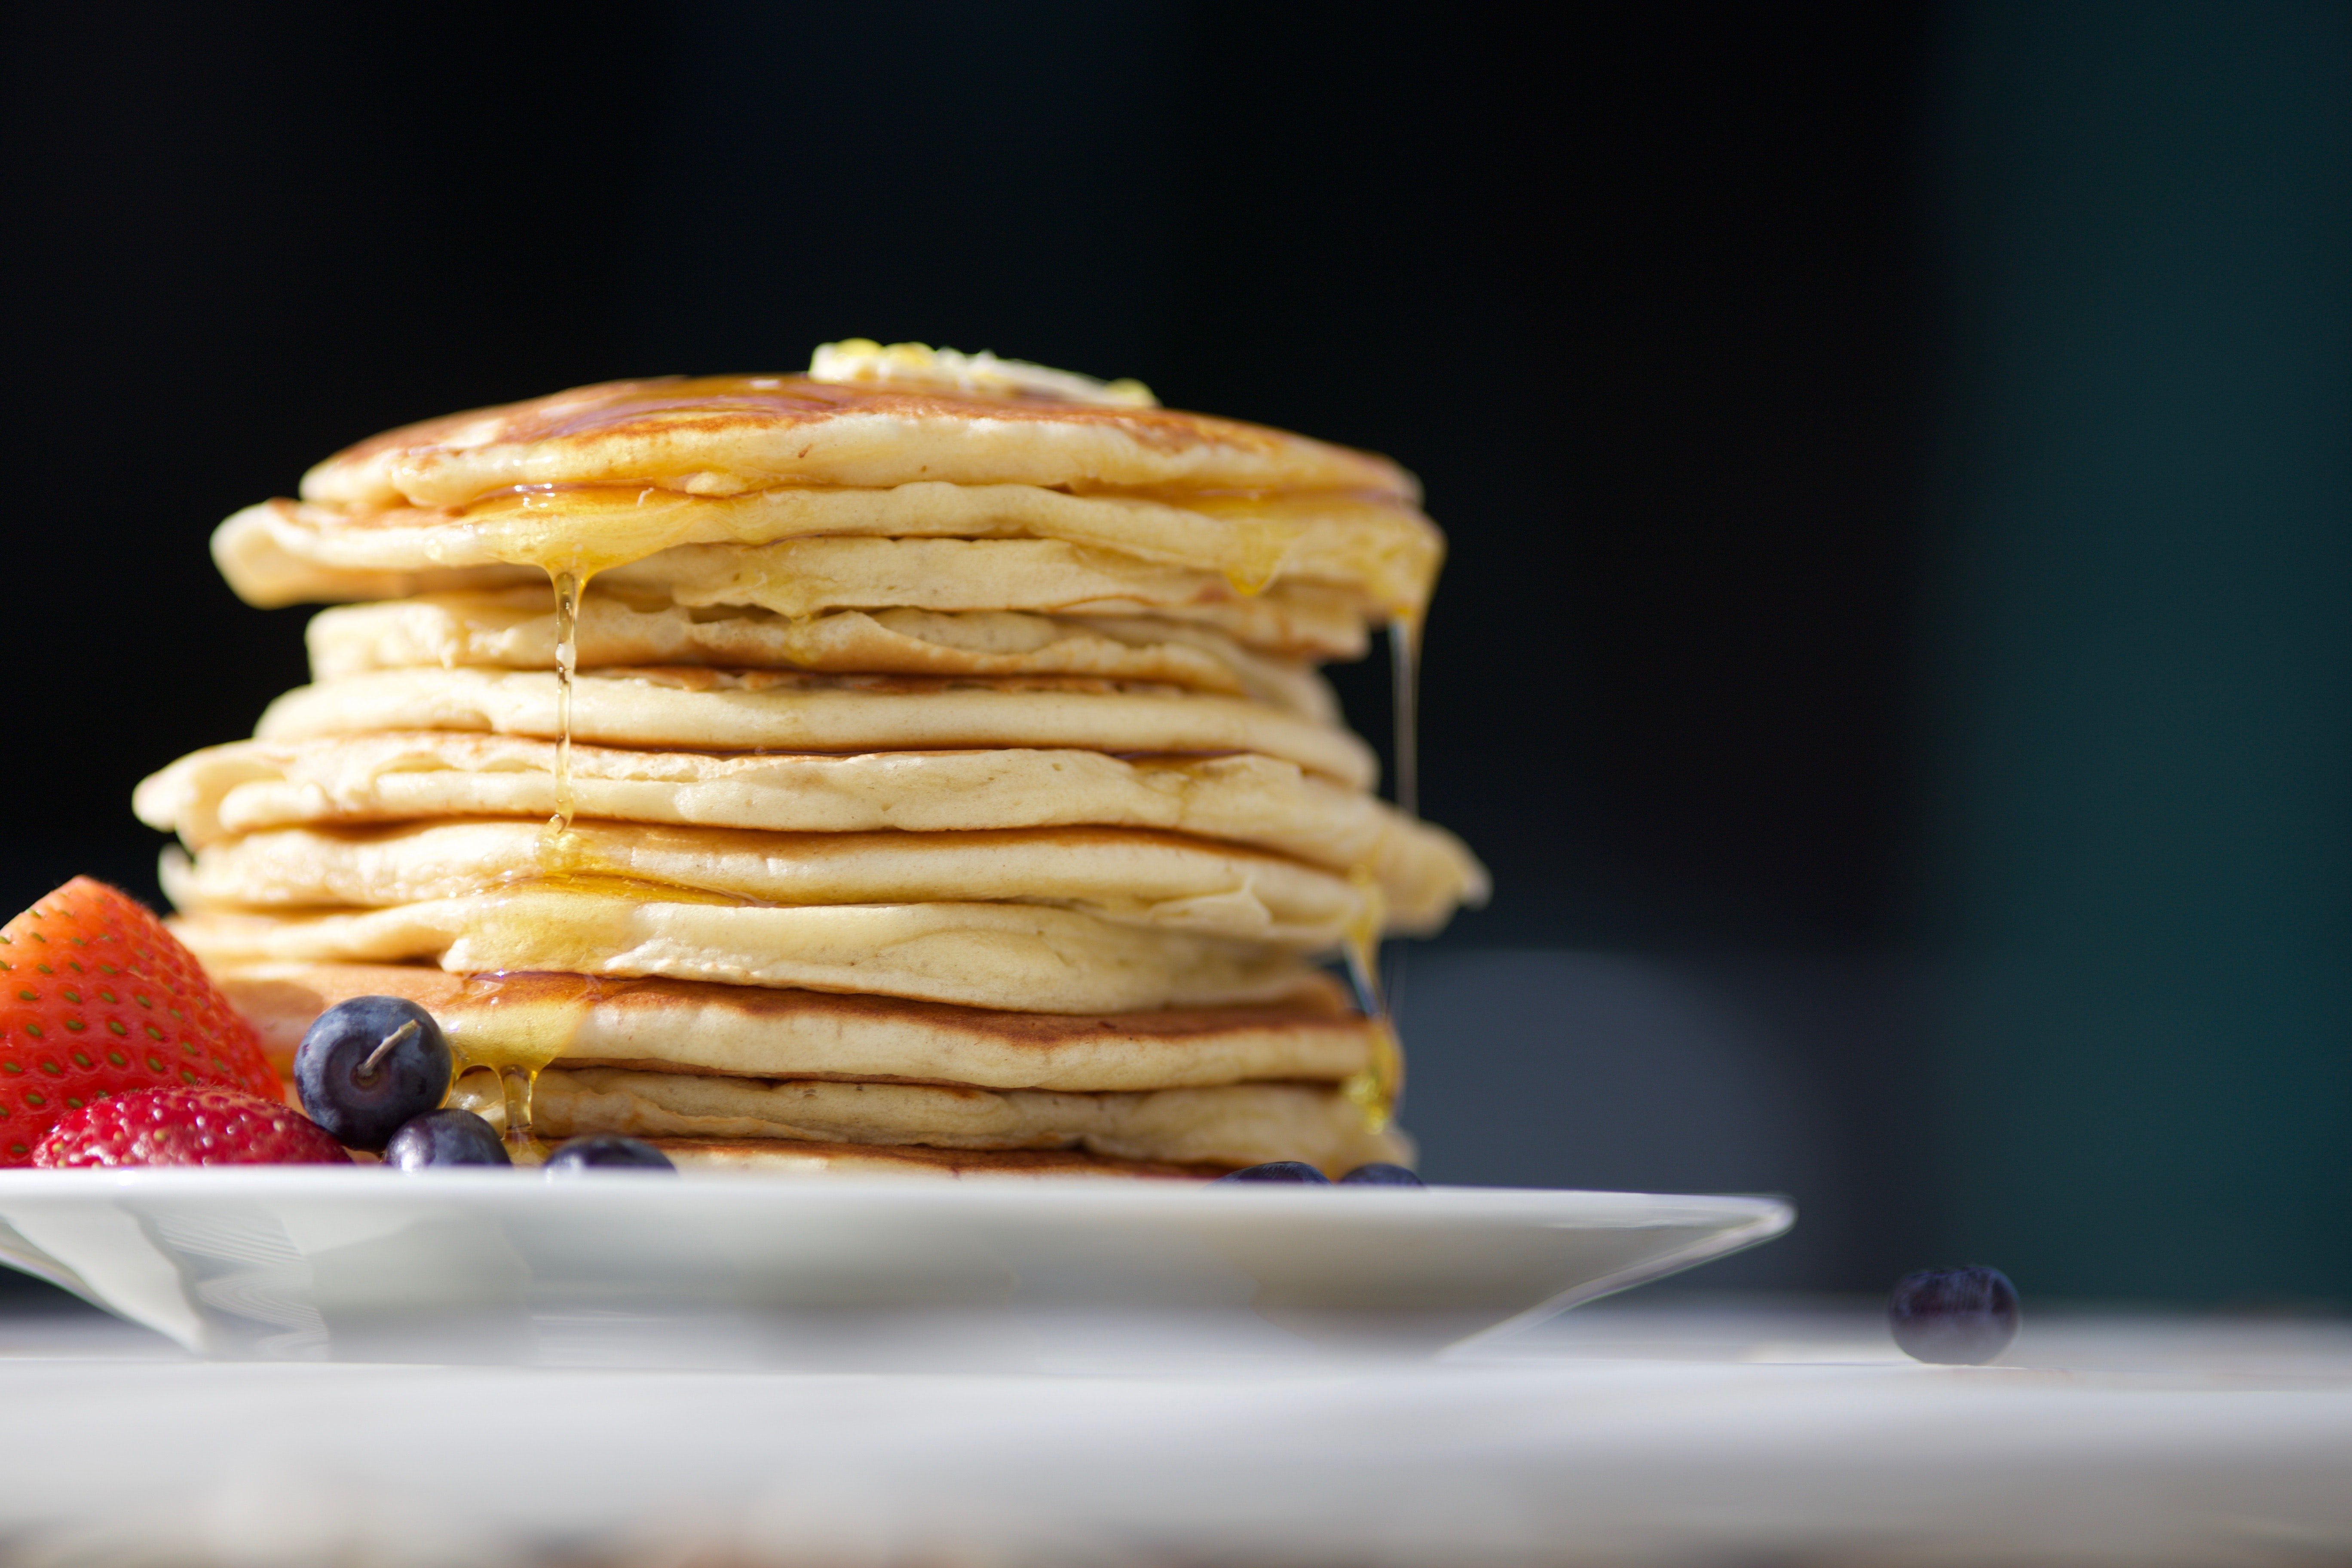 Joe commemorated his first meeting with Stella at the café by serving her favorite pancakes with maple syrup. | Source: Unsplash